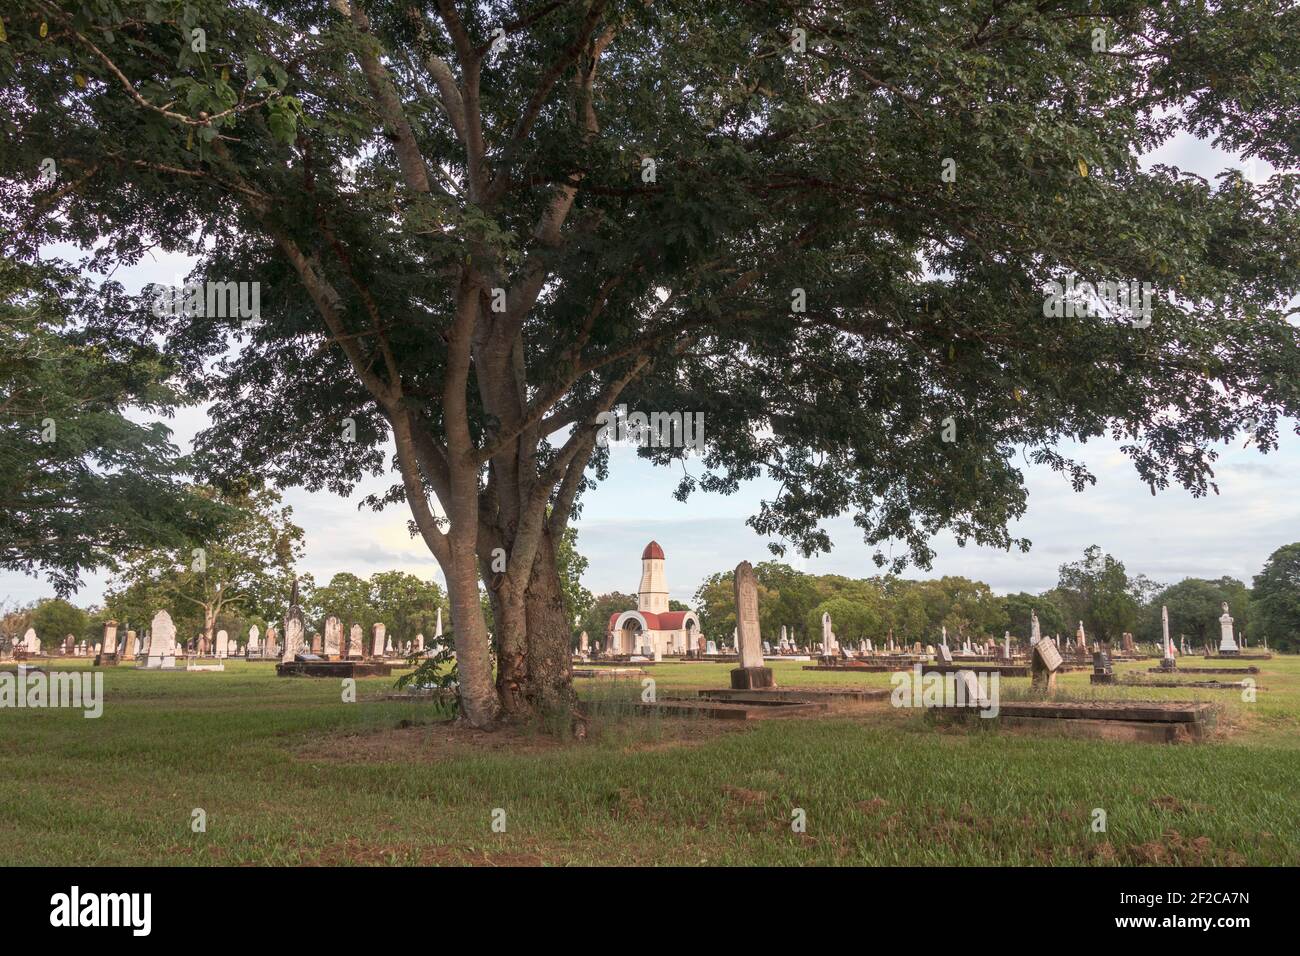 Large tree over cemetery graves Stock Photo